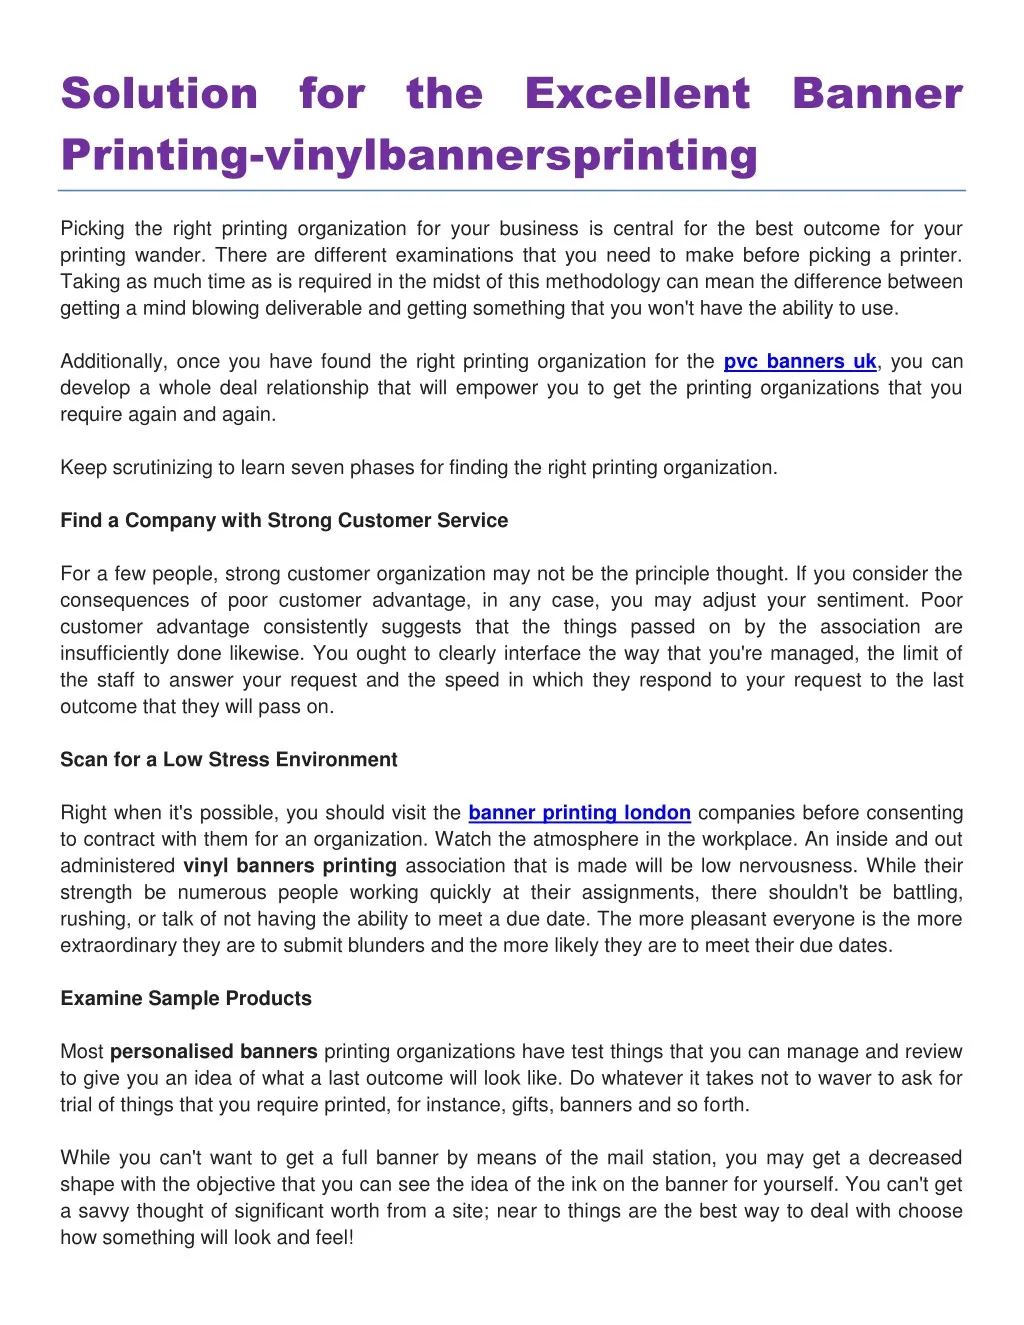 solution for the excellent banner printing